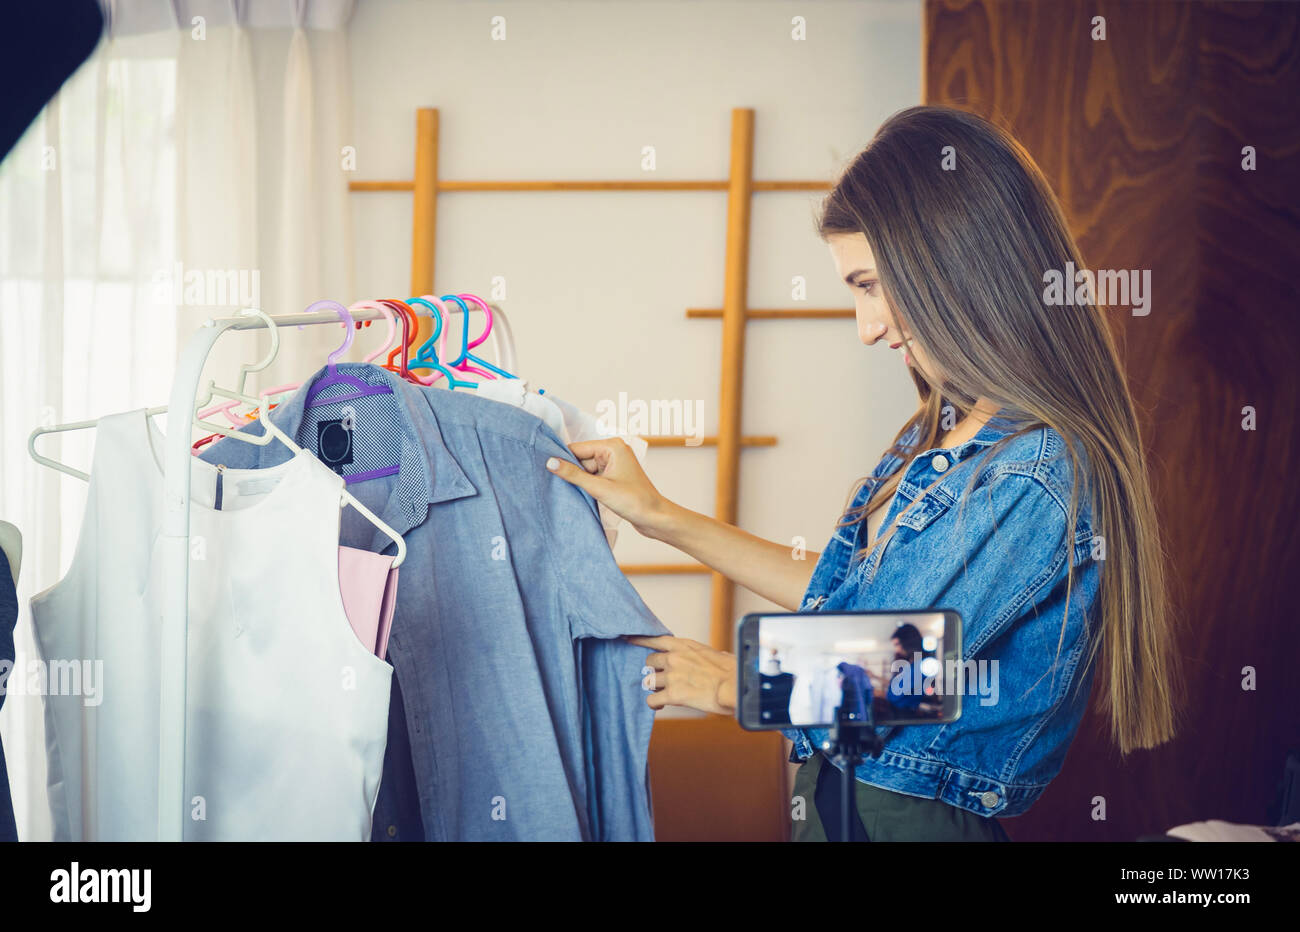 Young girl selling clothes online by live streaming from mobile phone. Stock Photo